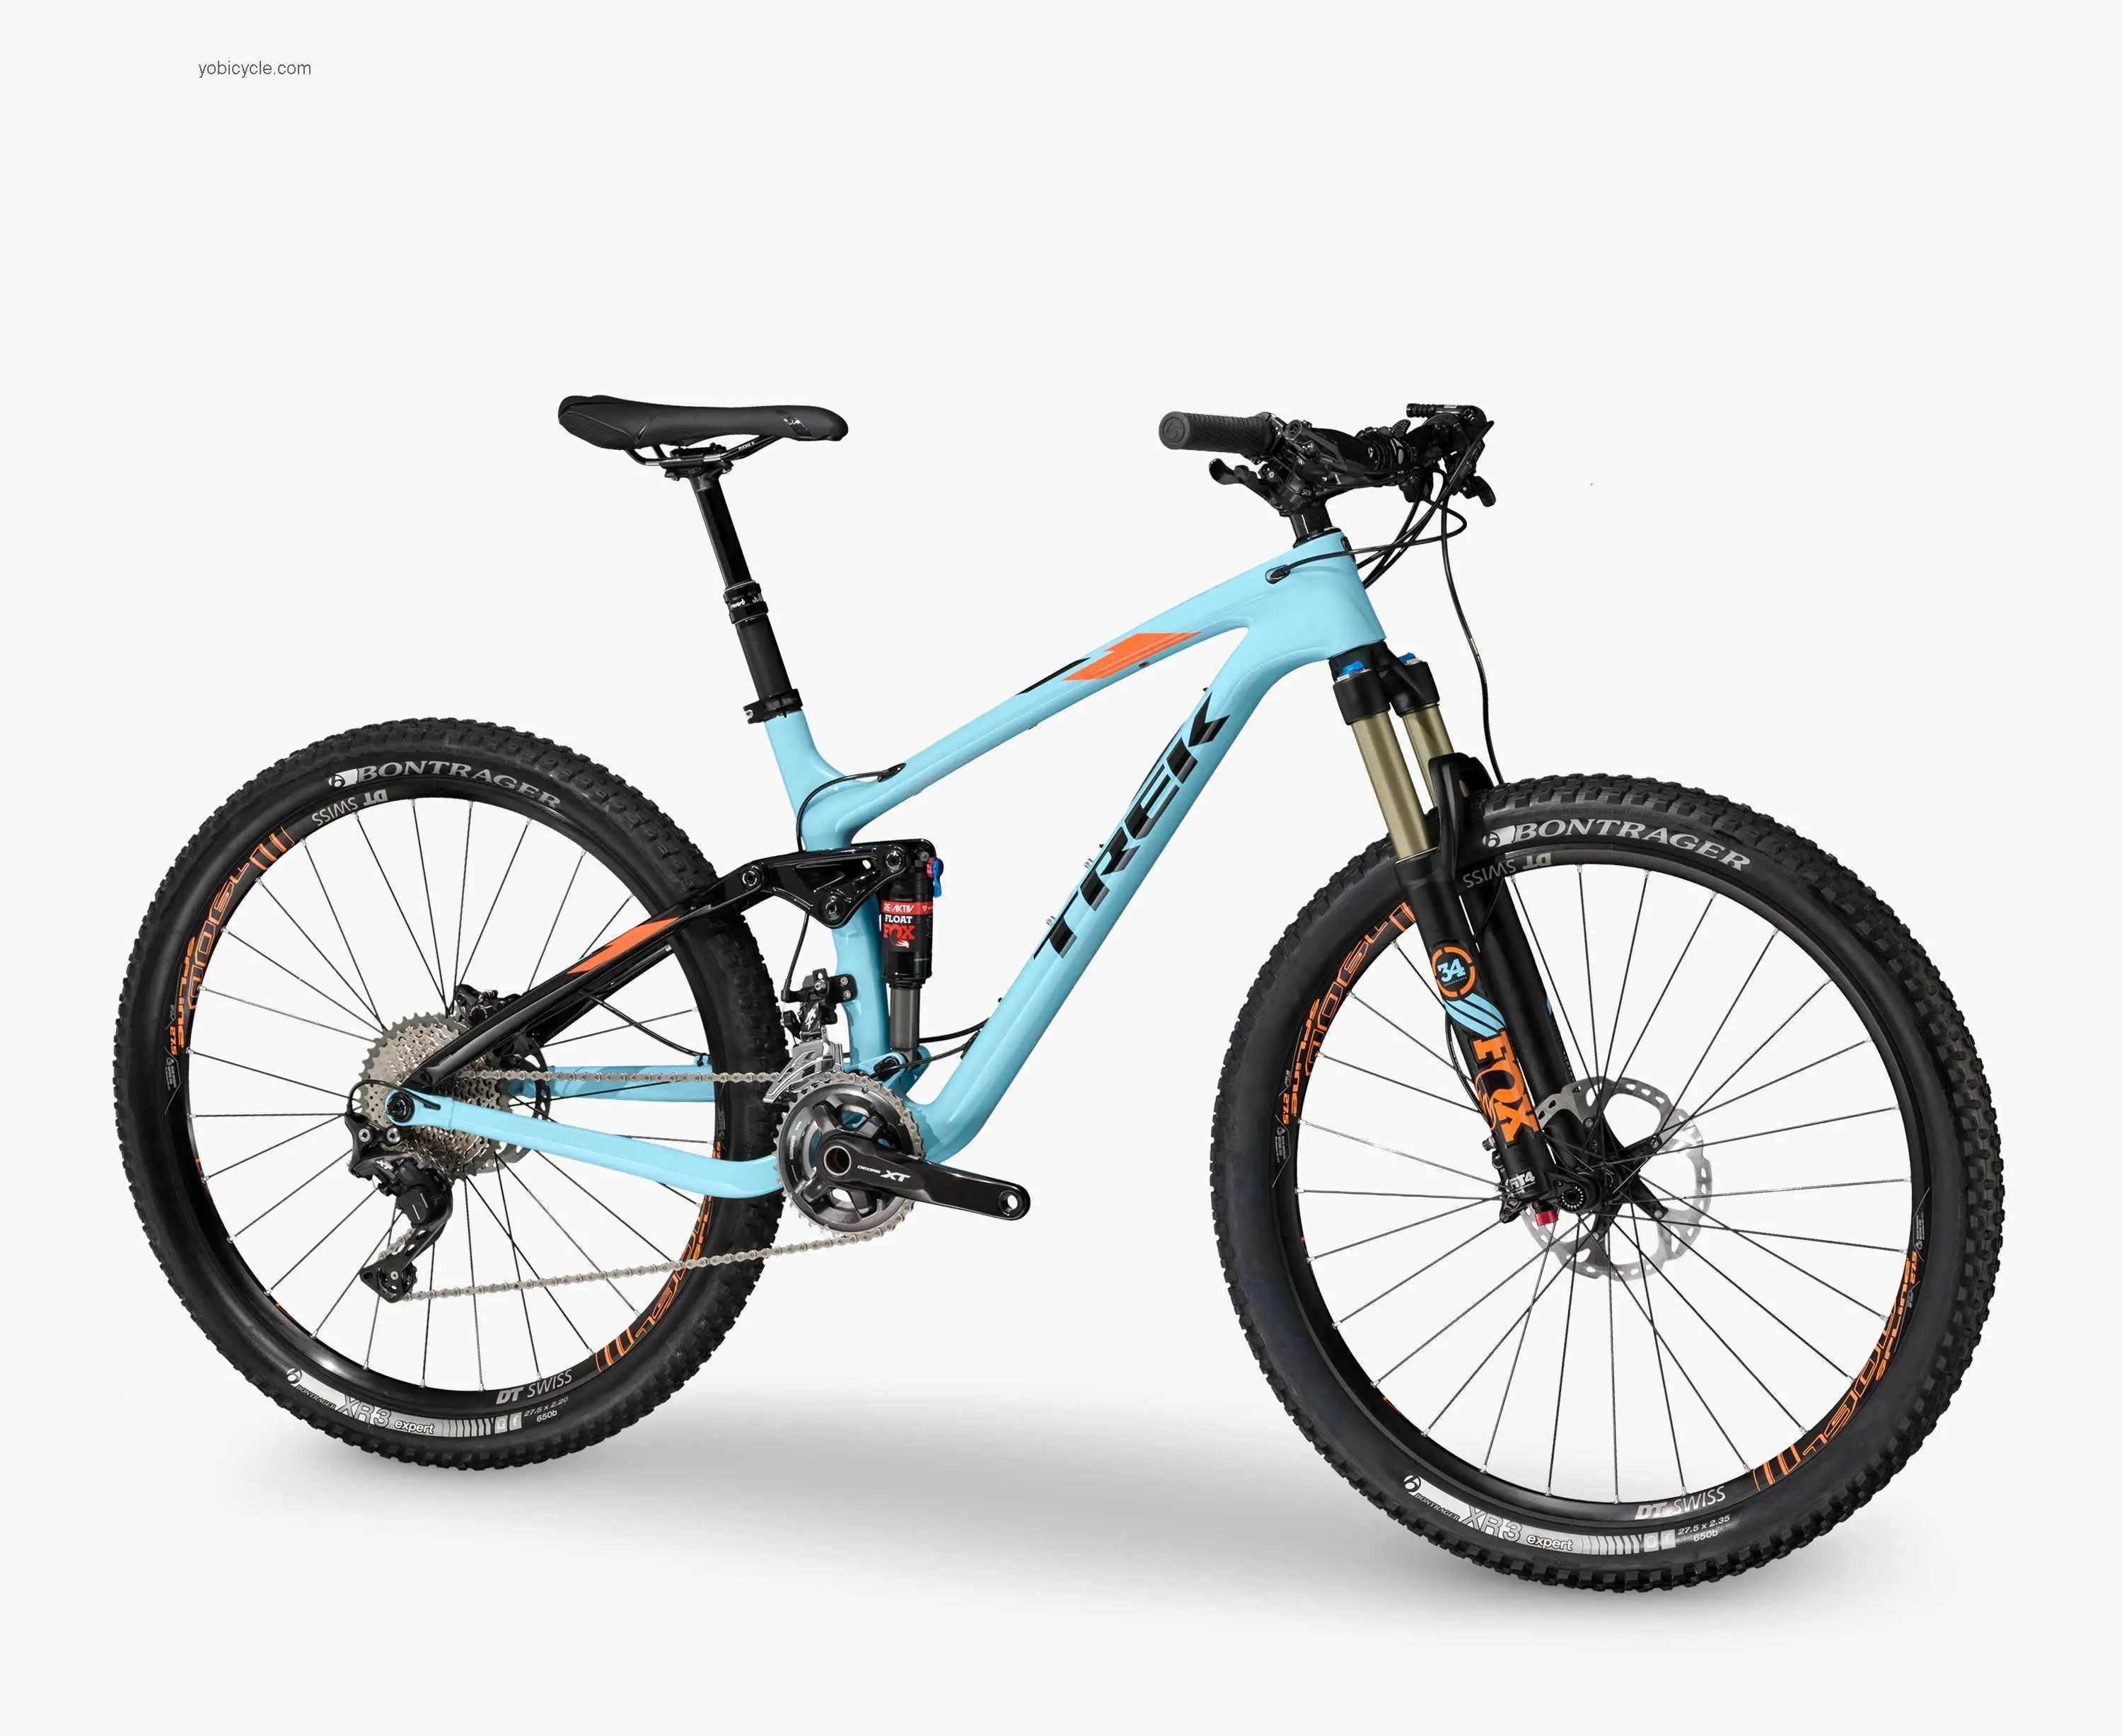 Trek  Fuel EX 9.8 27.5 Technical data and specifications